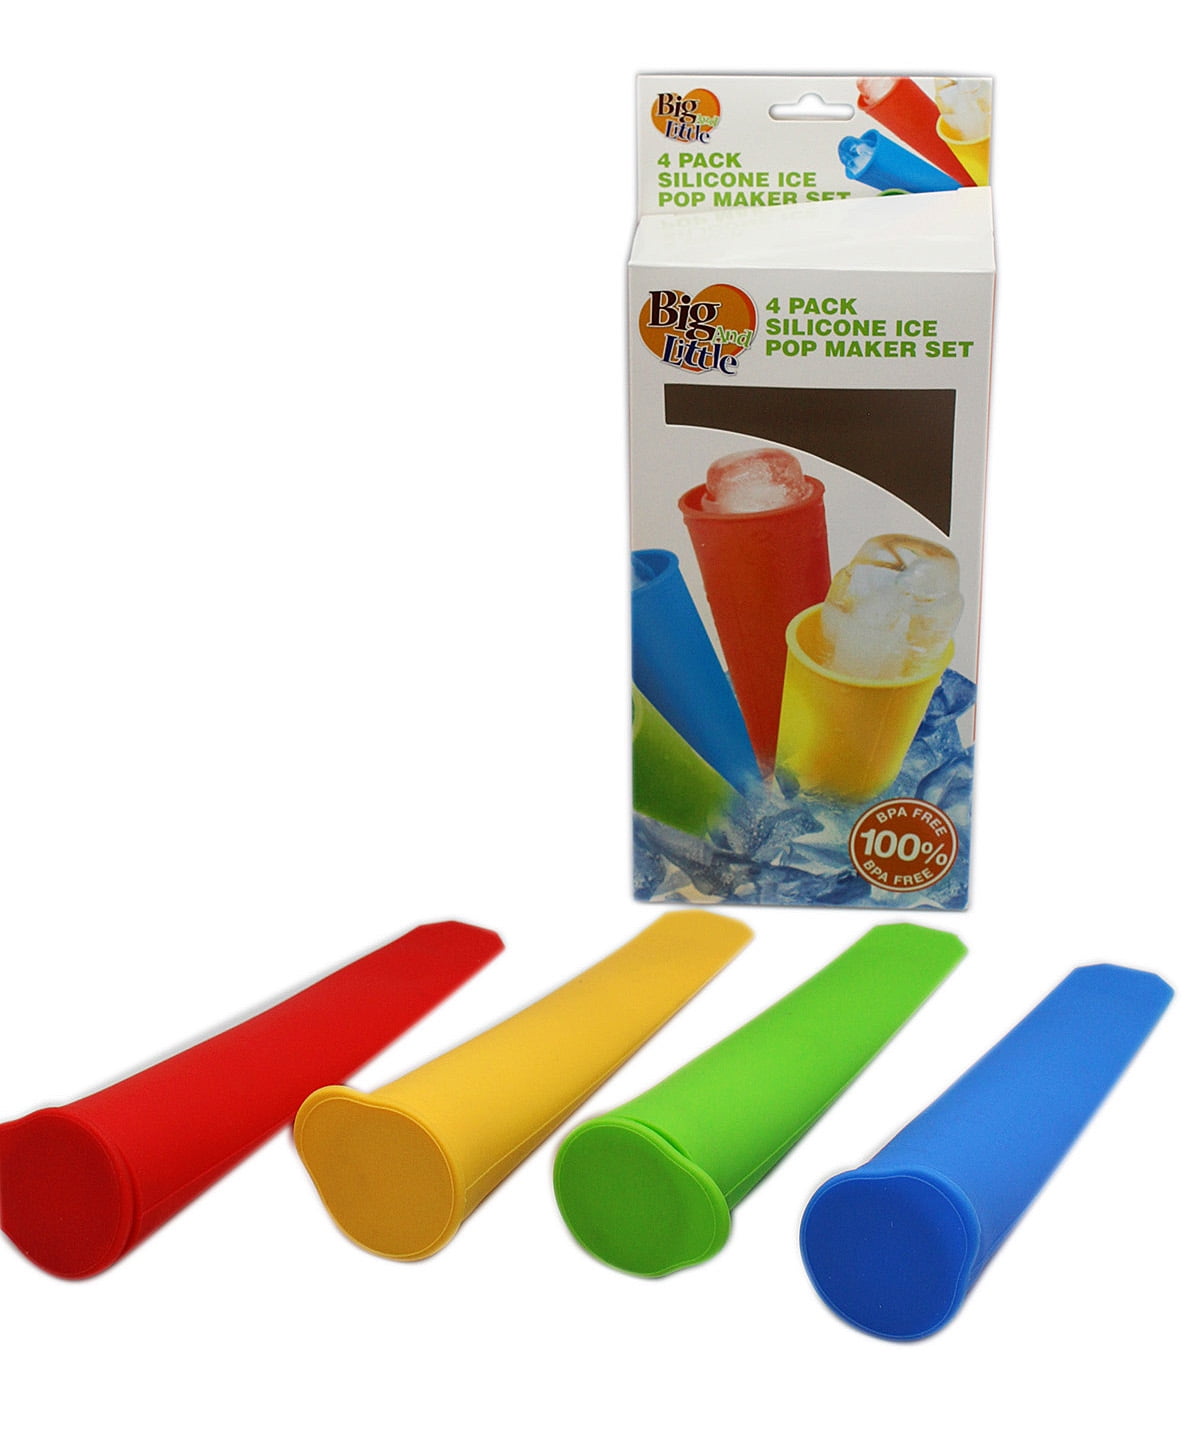 Assorted Colors Popsicle Molds CHICHIC Silicone Ice Pop Maker Set 4 Pack 